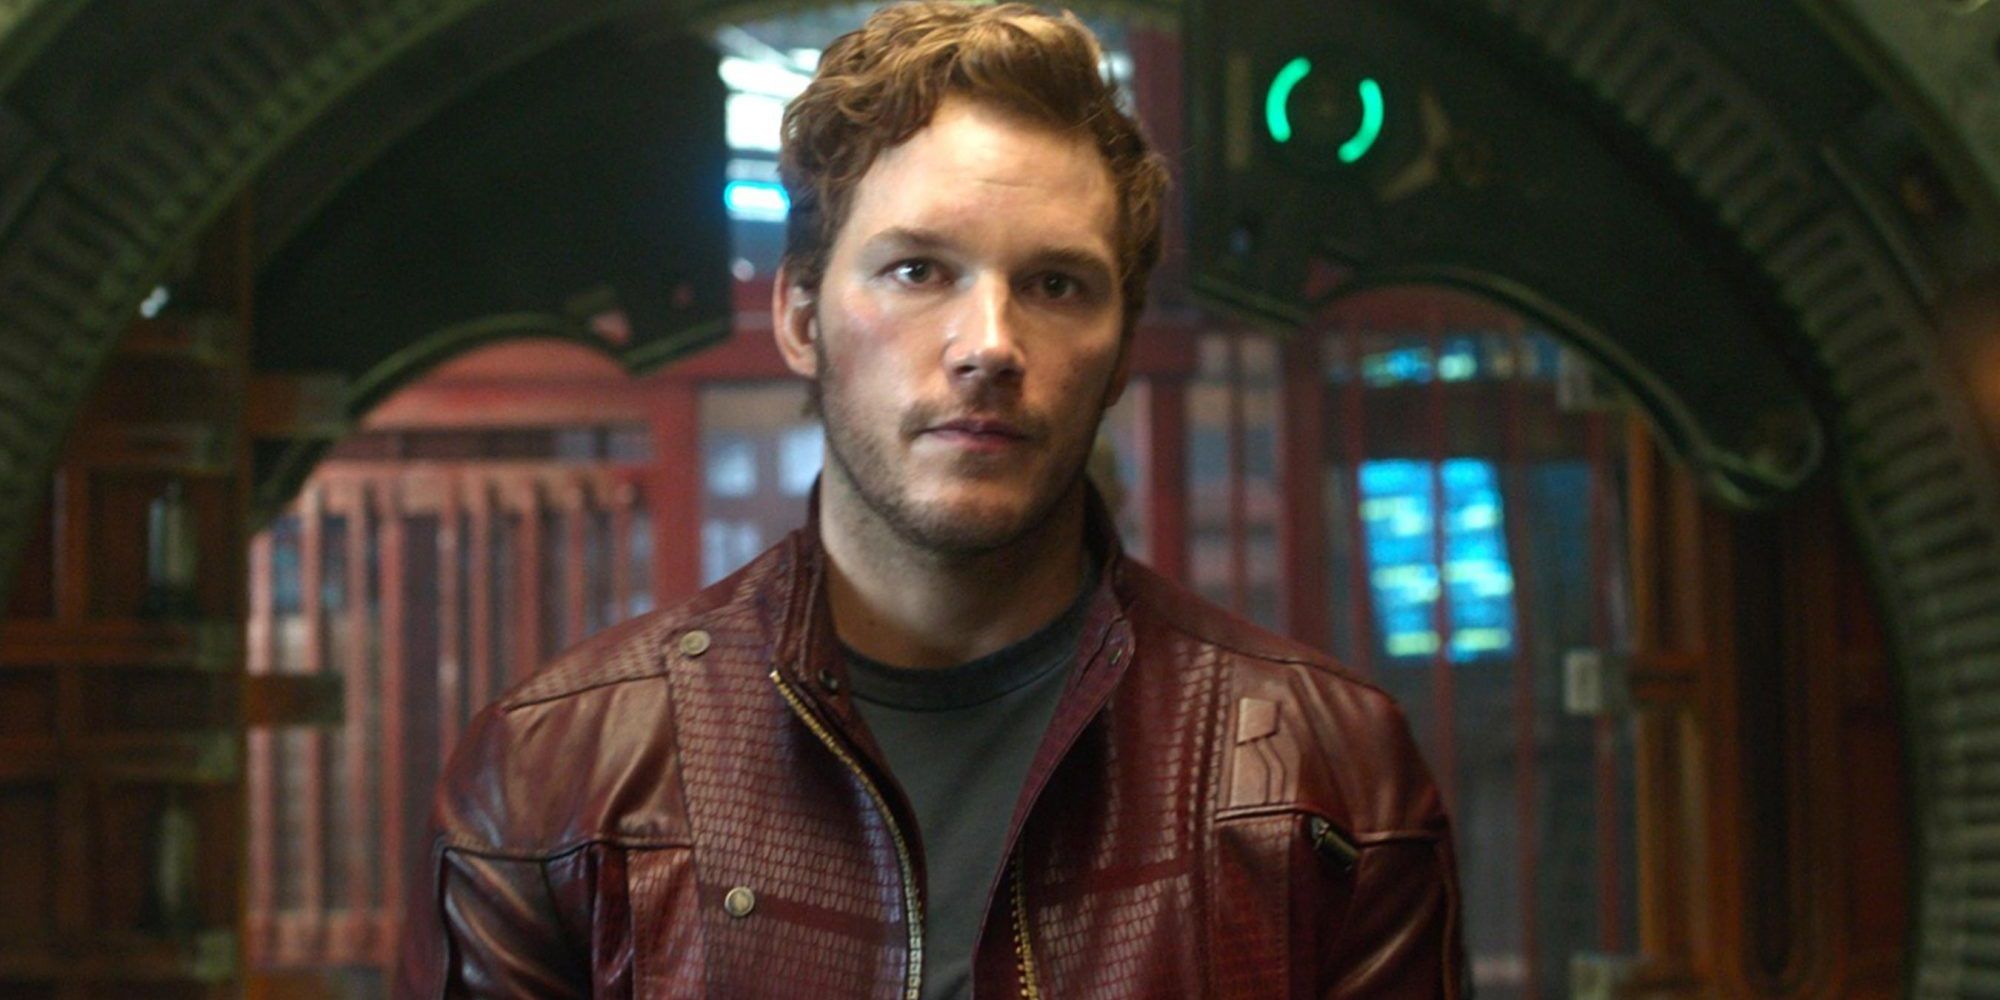 Peter Quill aboard a spaceship in Guardians of the Galaxy